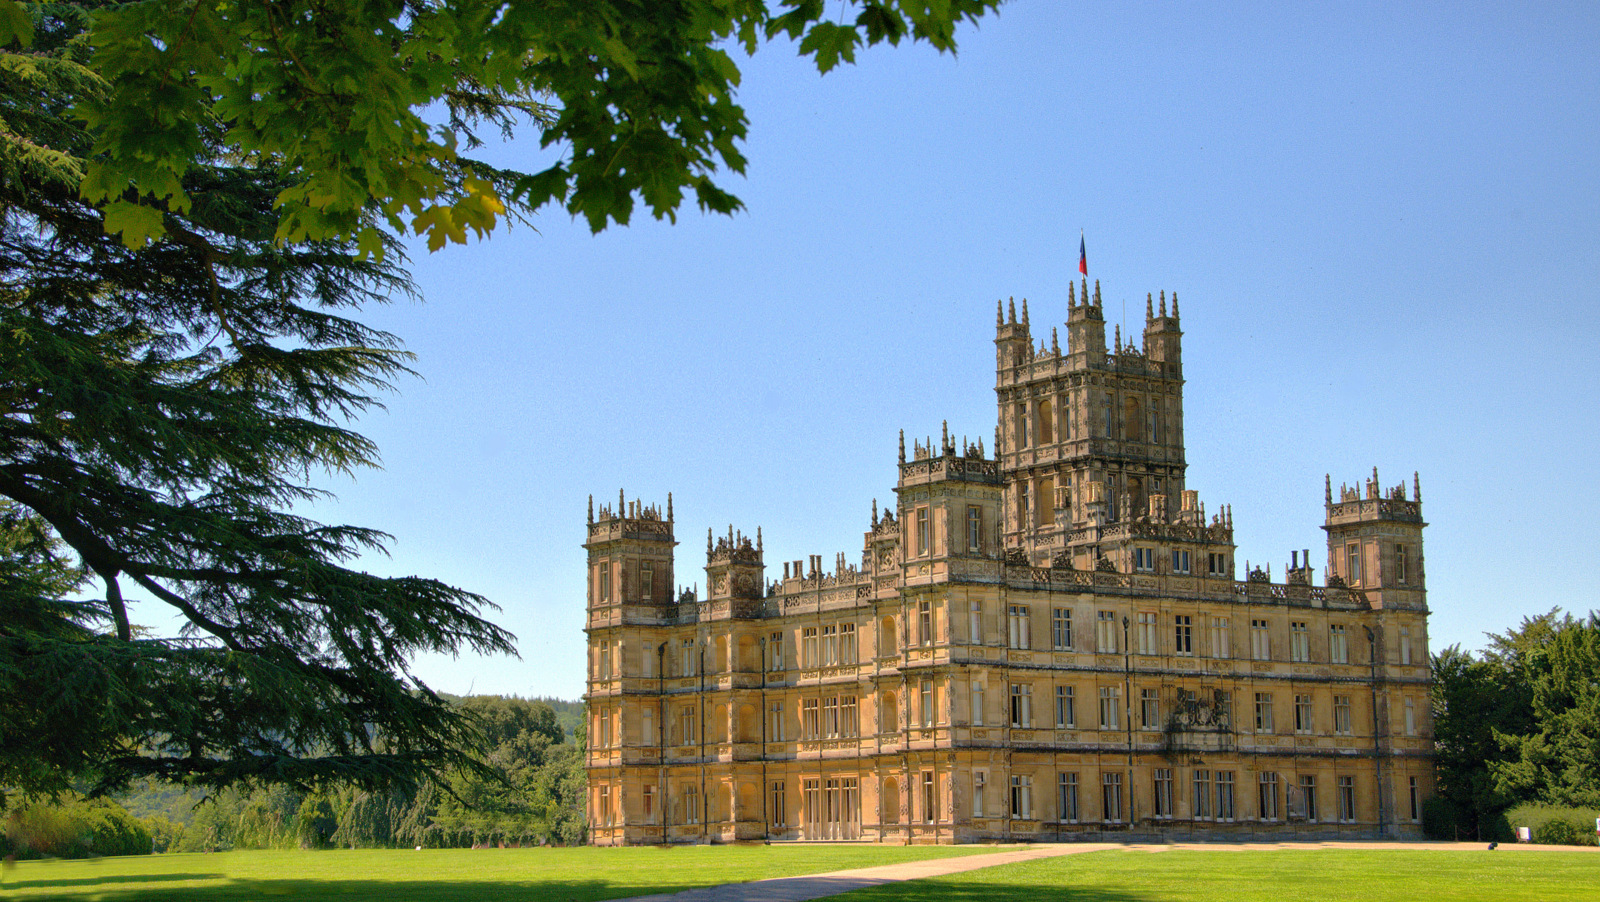 Highclere Castle - Downton Abbey - Wed 17th July 2019